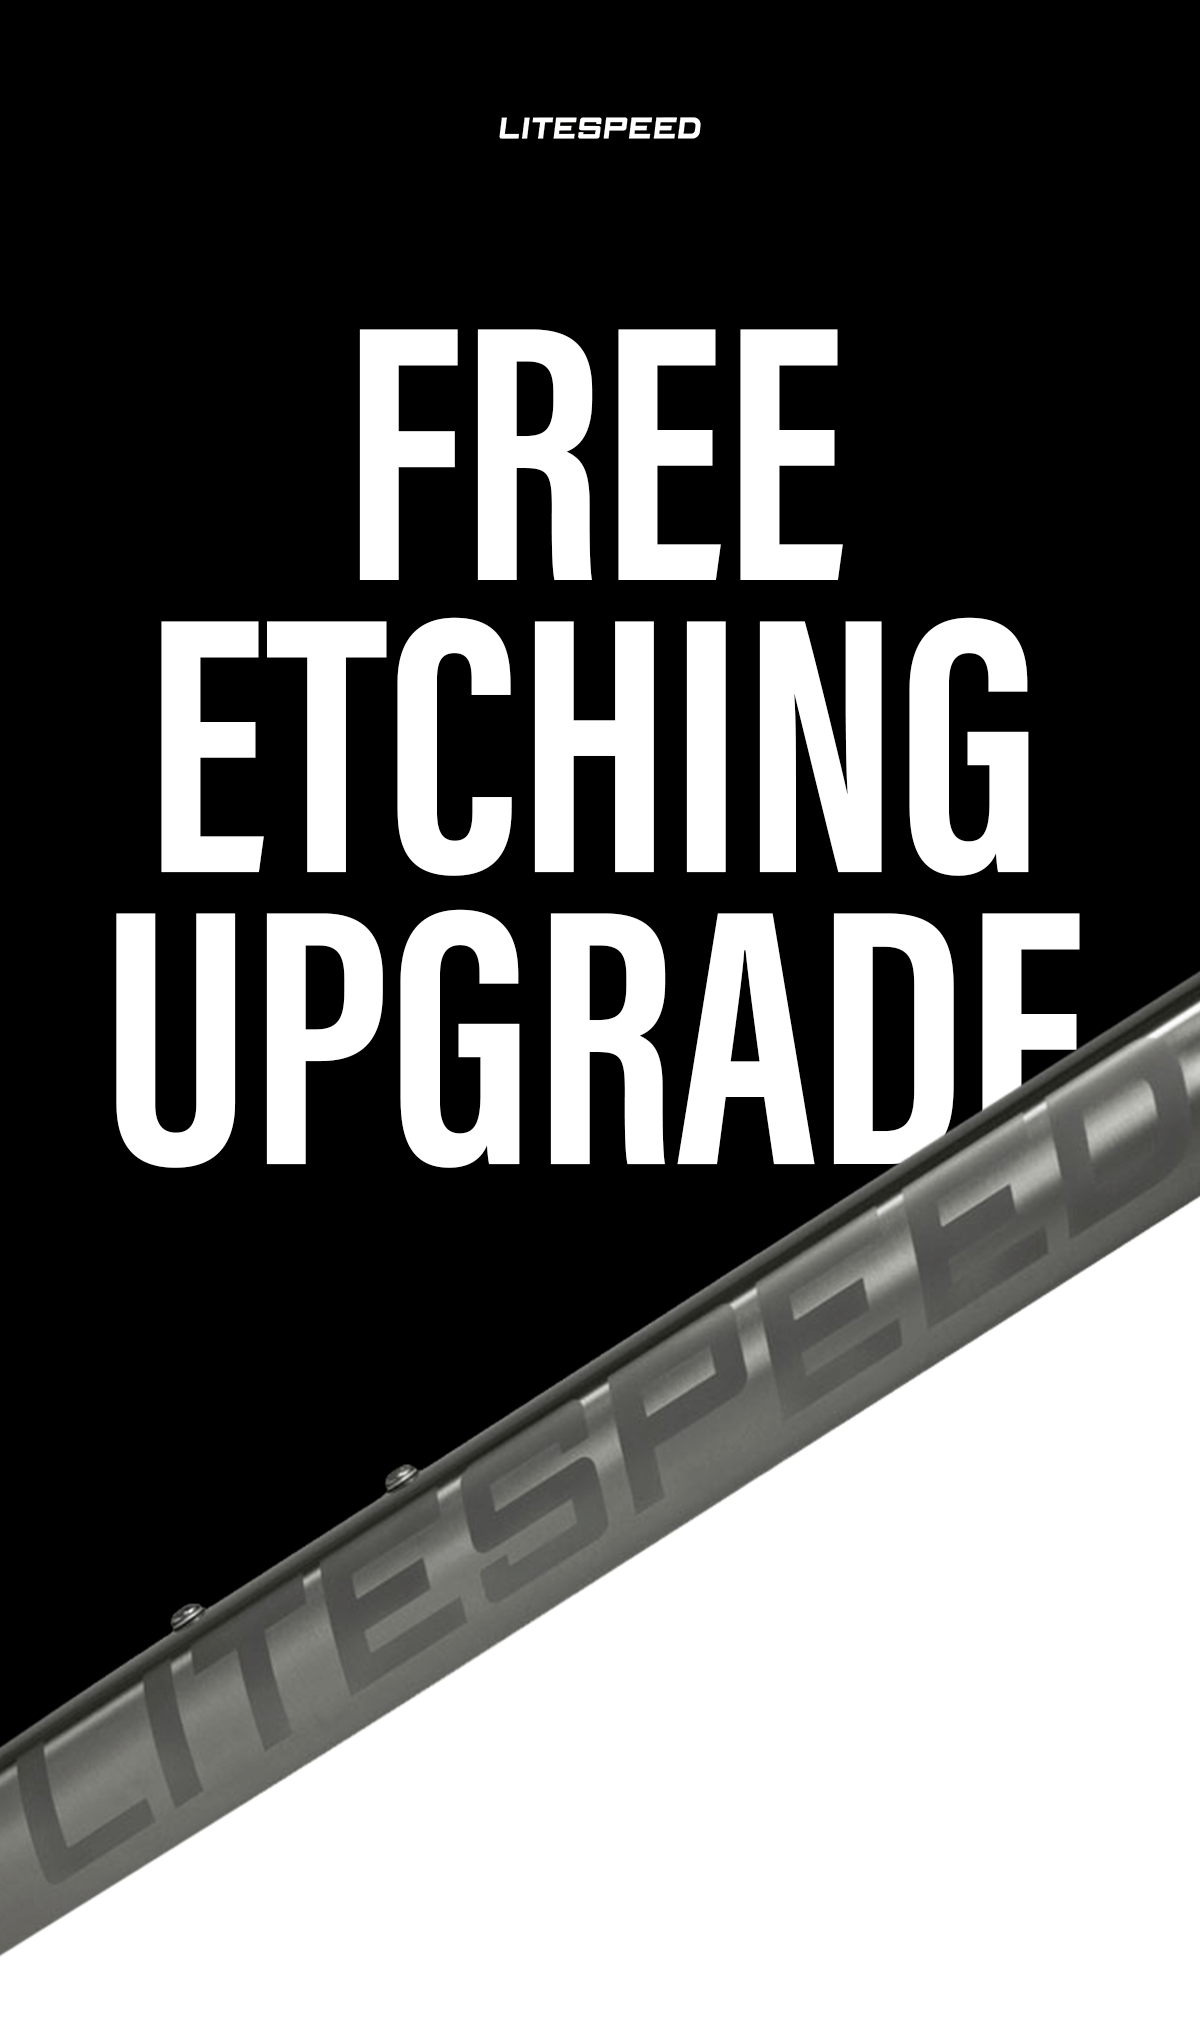 JUST ADDED: Etched Graphics Upgrade!